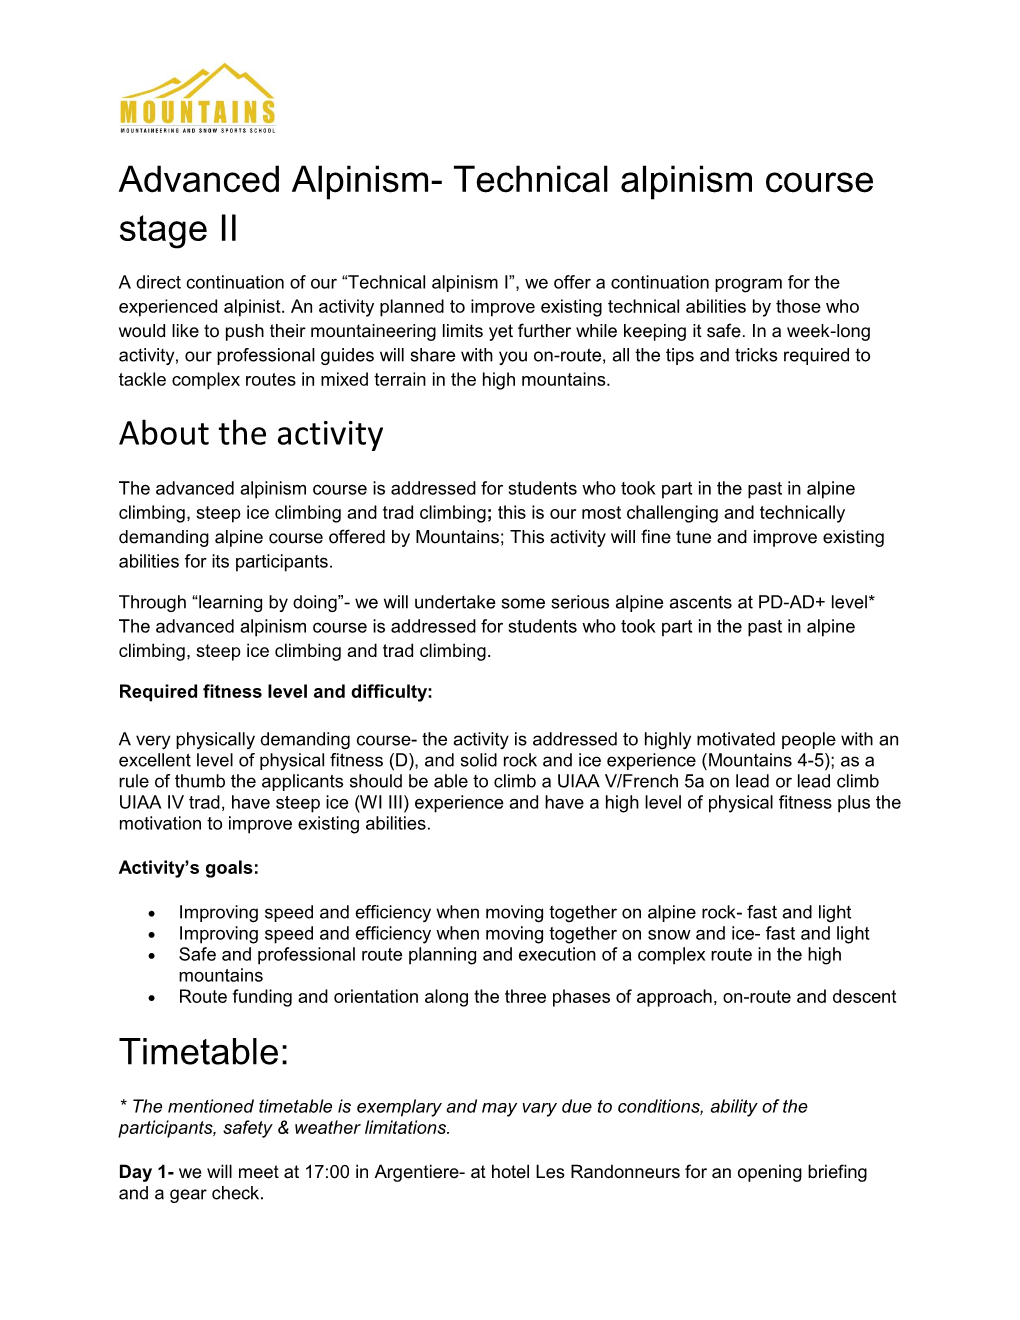 Technical Alpinism Course Stage II About the Activity Timetable